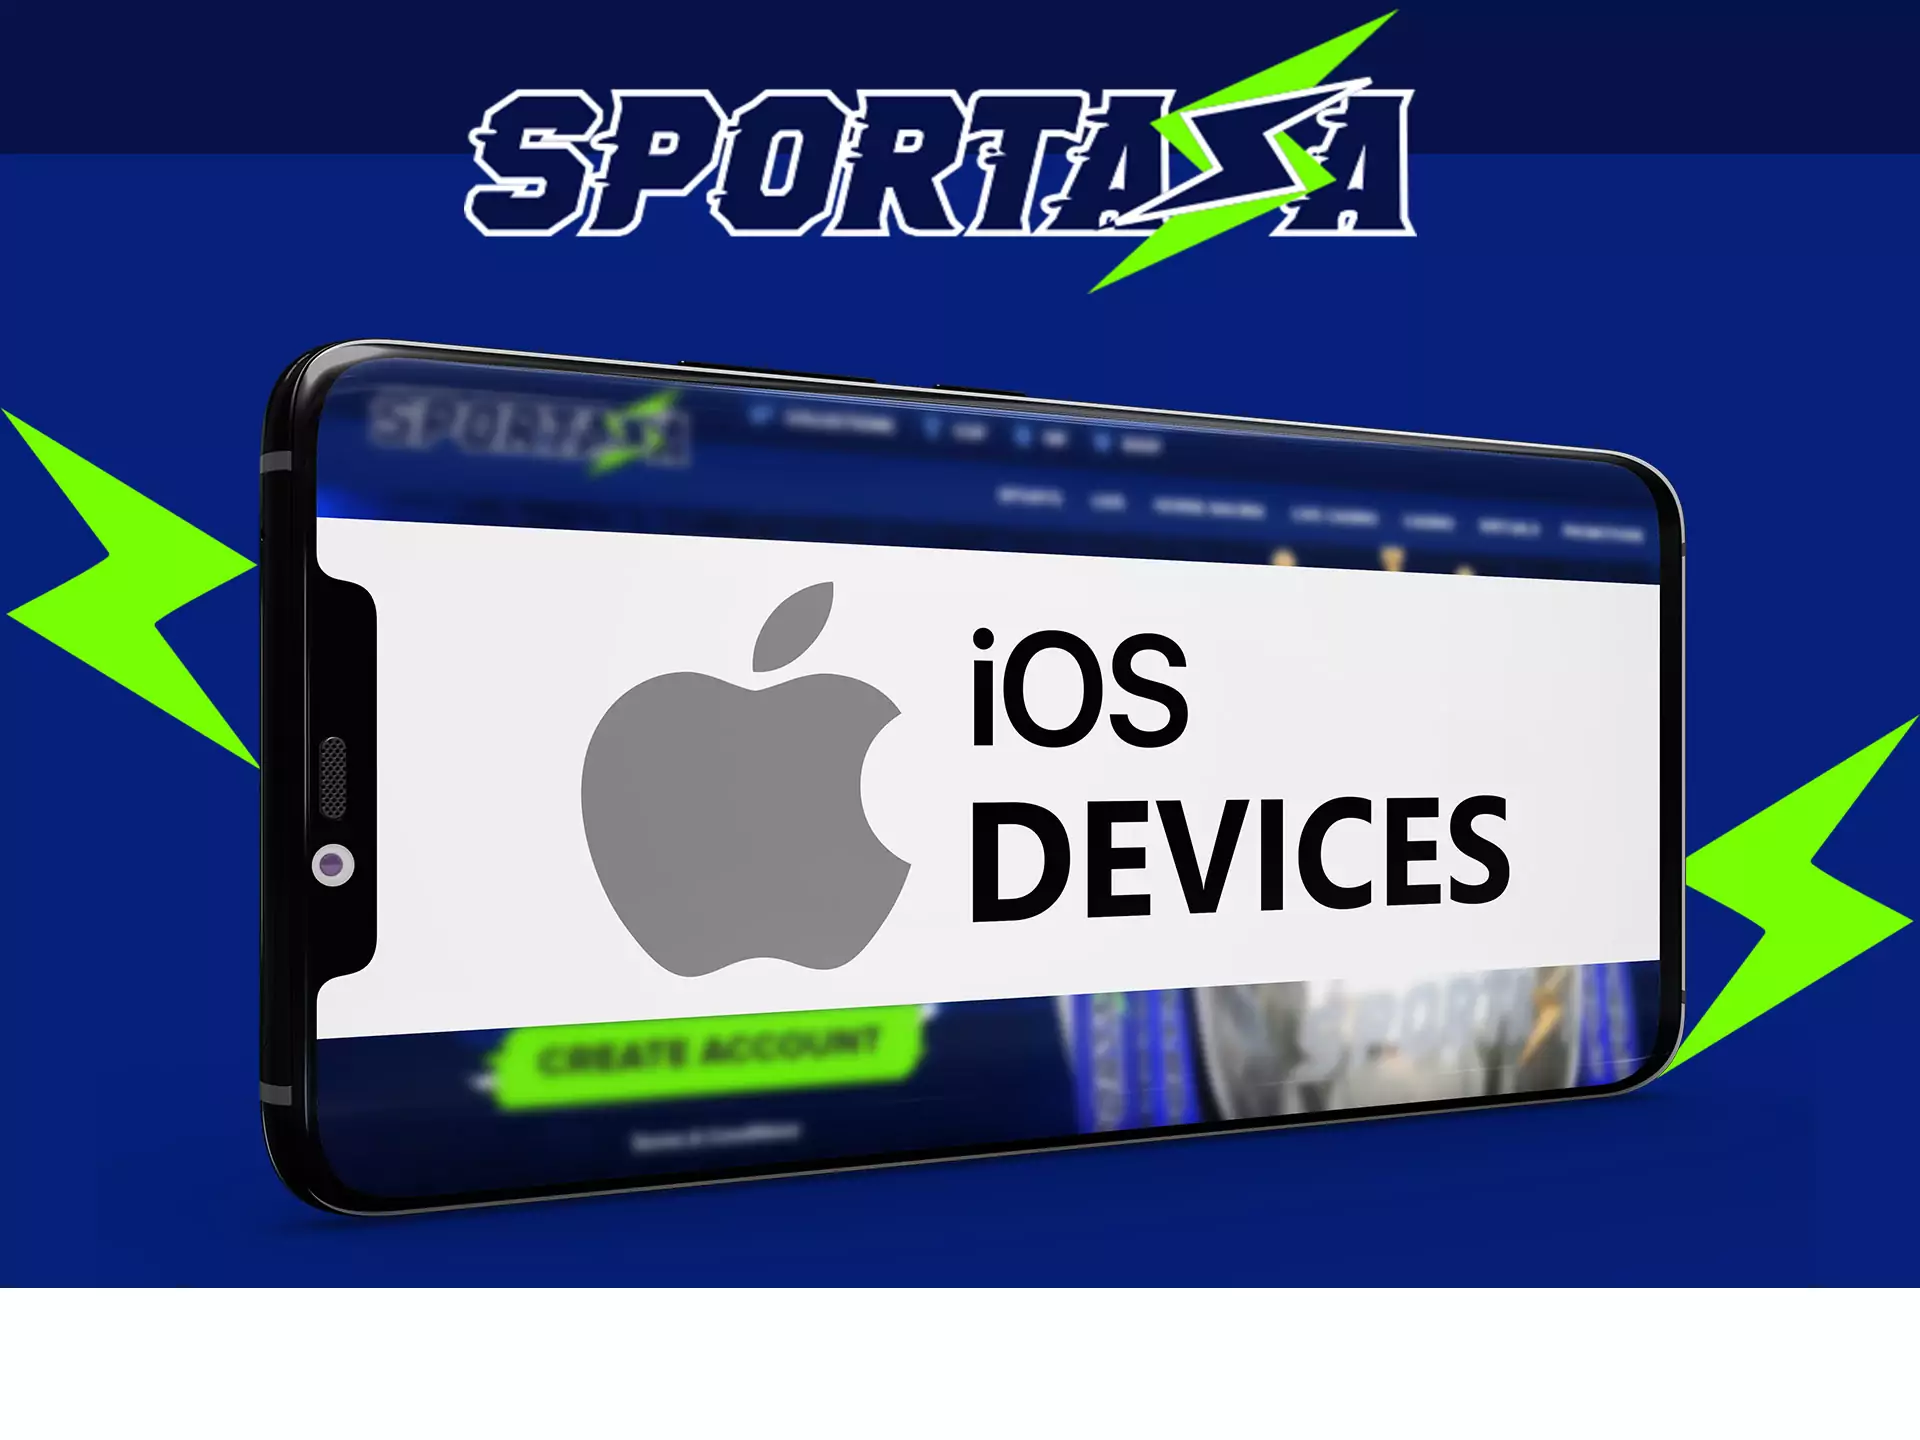 Sportaza app supports most of iOS devices.